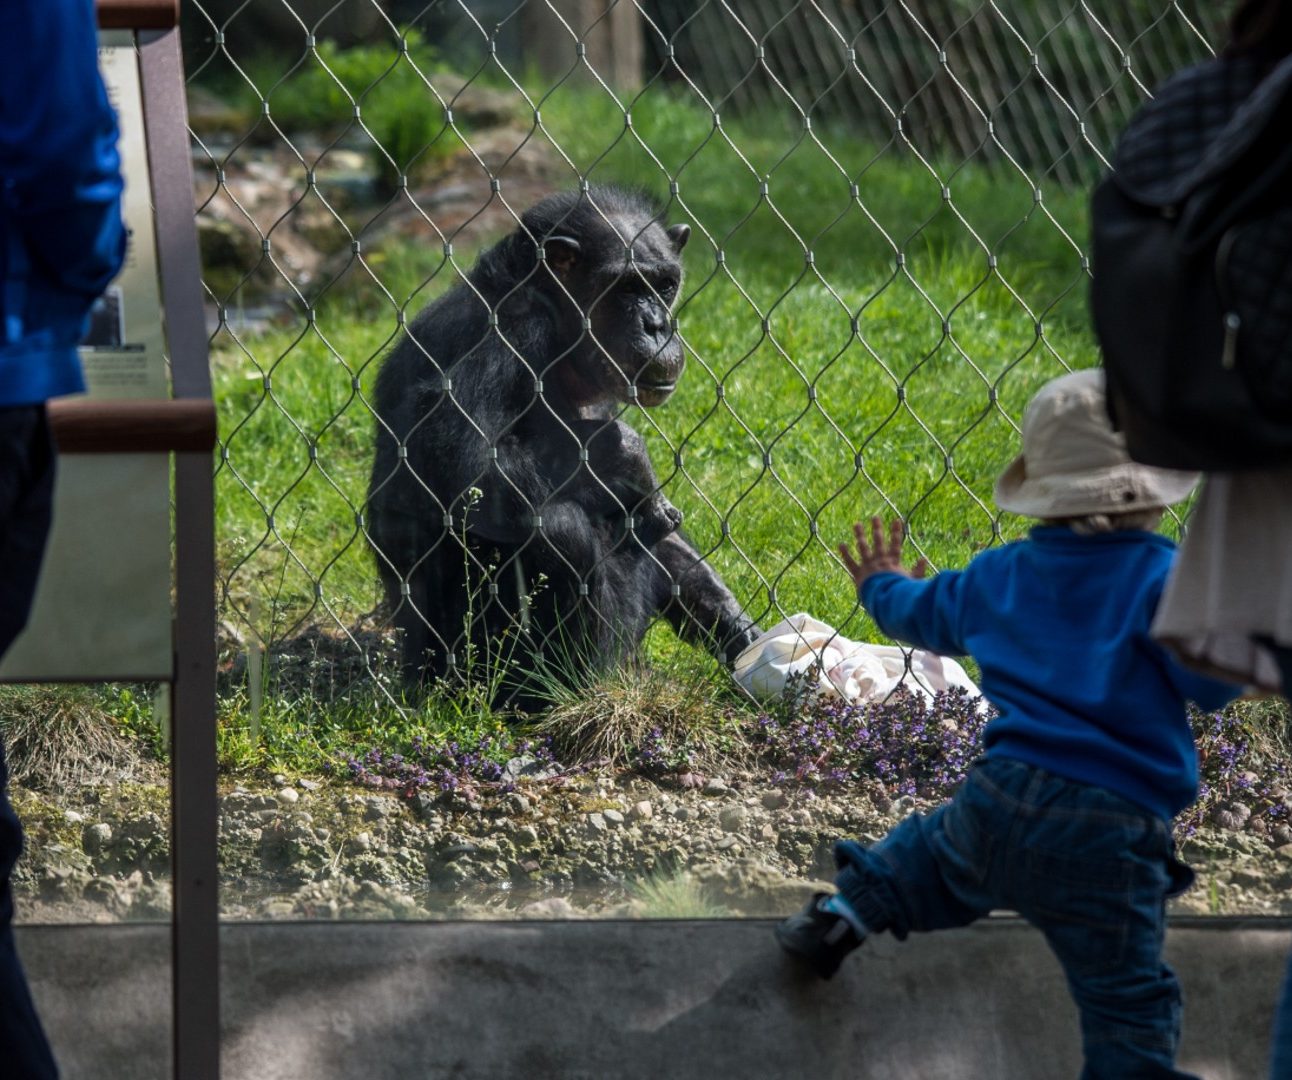 Two adults and a little boy looking at a chimpanzee through a mesh fence, in a zoo enclosure